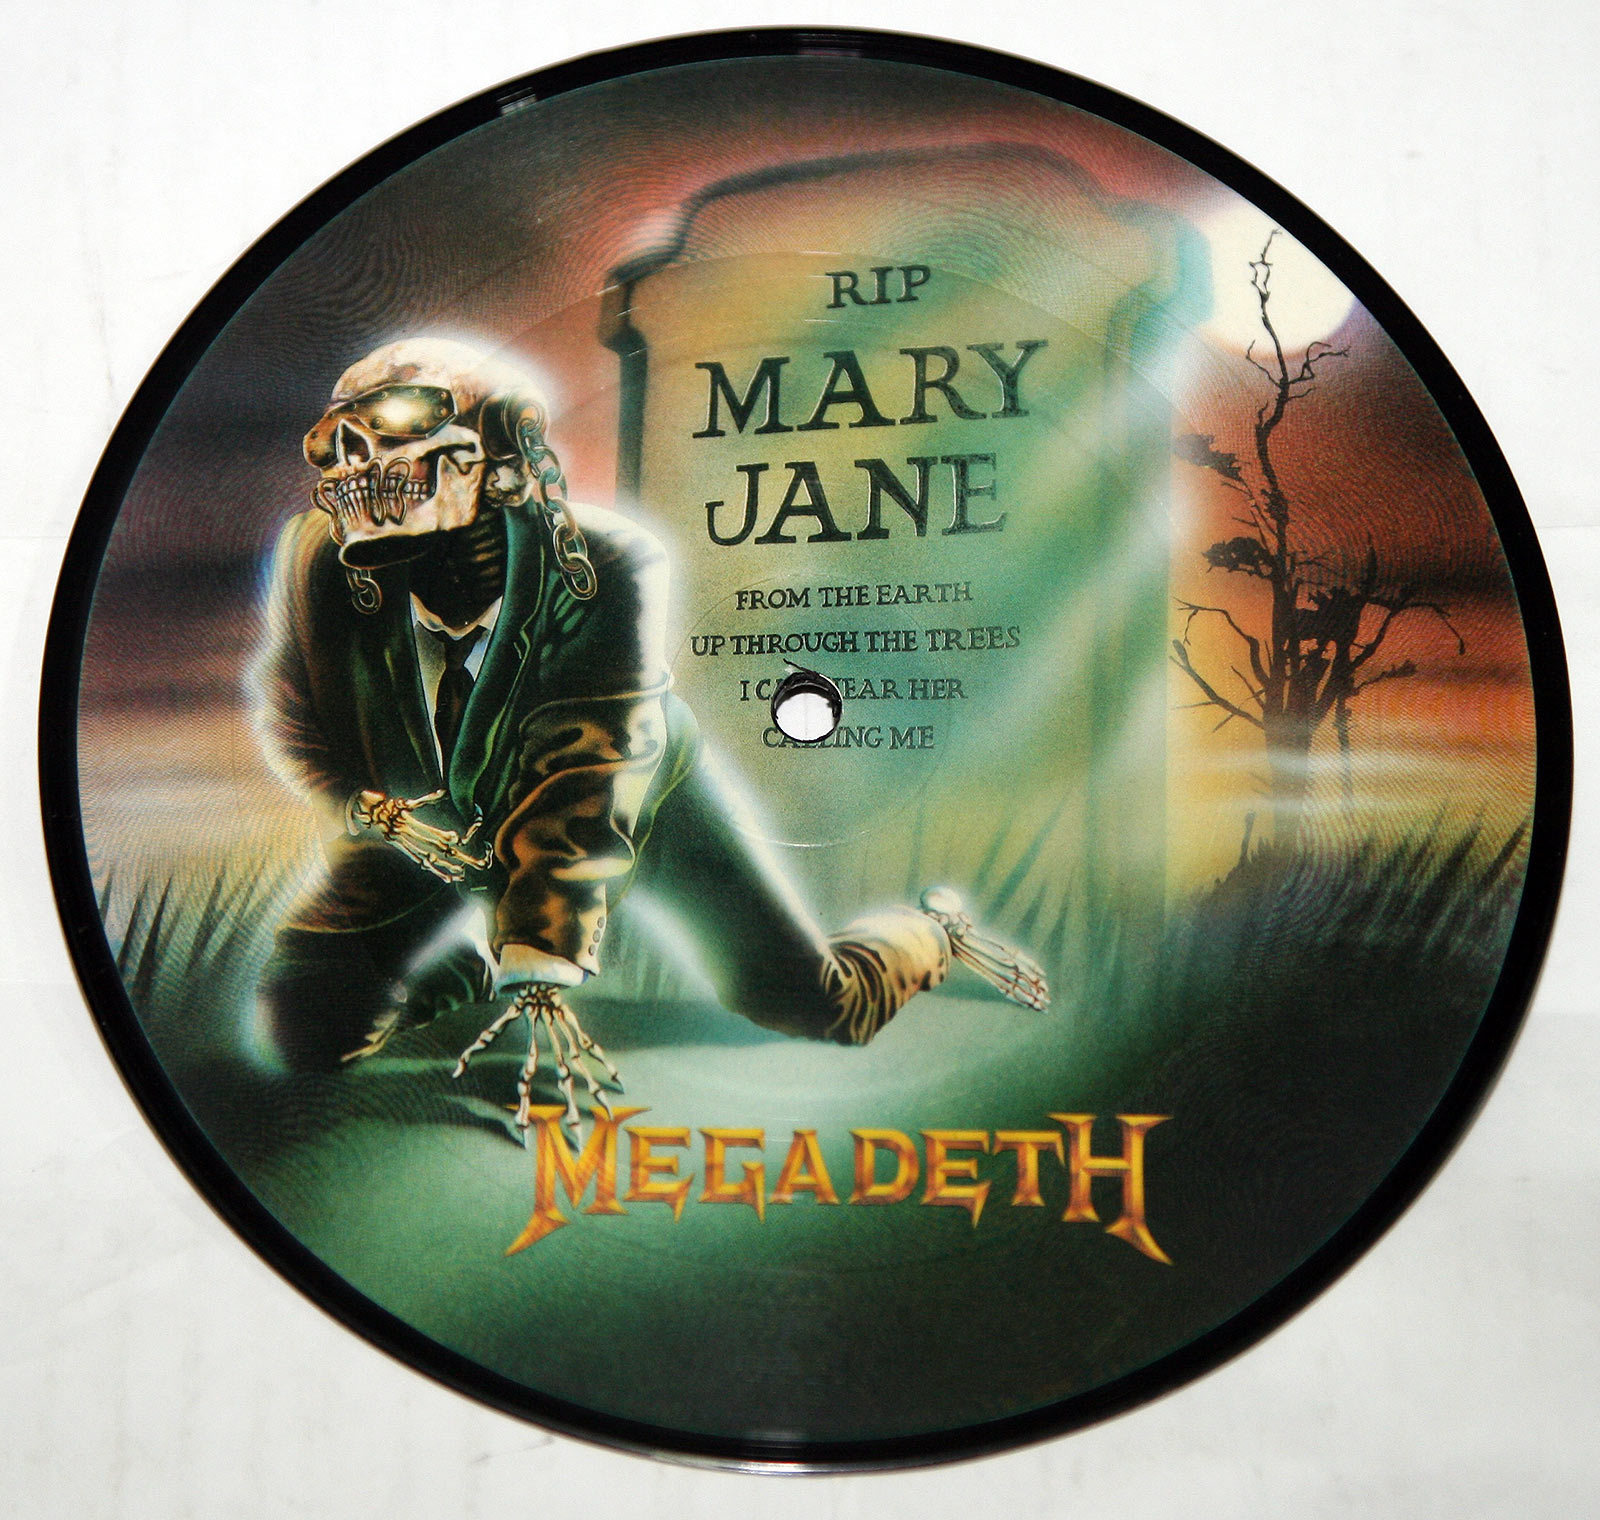 High Resolution Photo Megadeth Mary Jane / Hook In Mouth Picture Disc  Vinyl Record